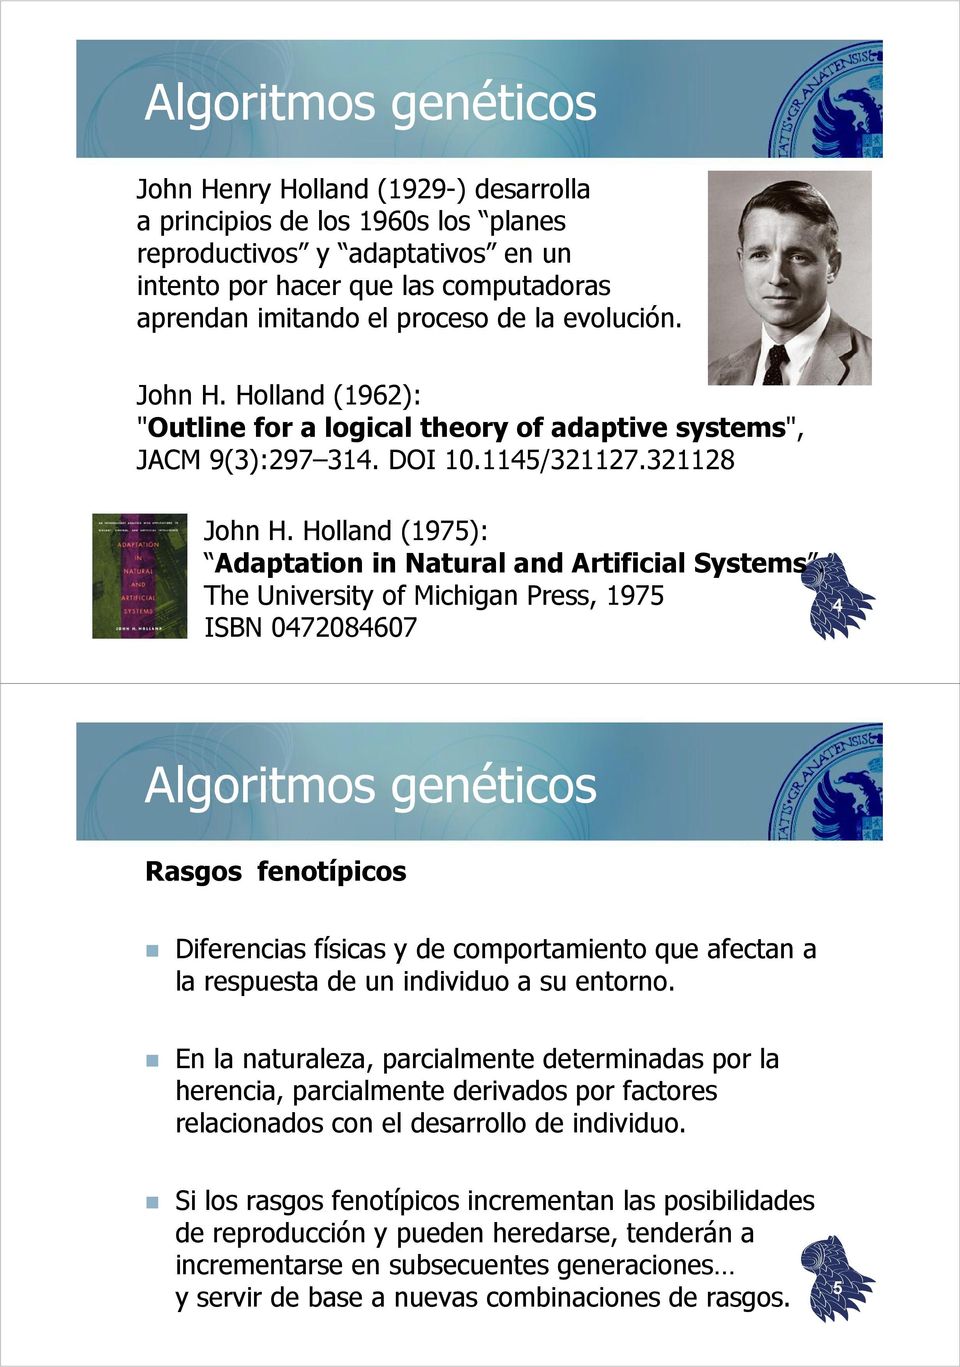 Holland (1975): Adaptation in Natural and Artificial Systems.